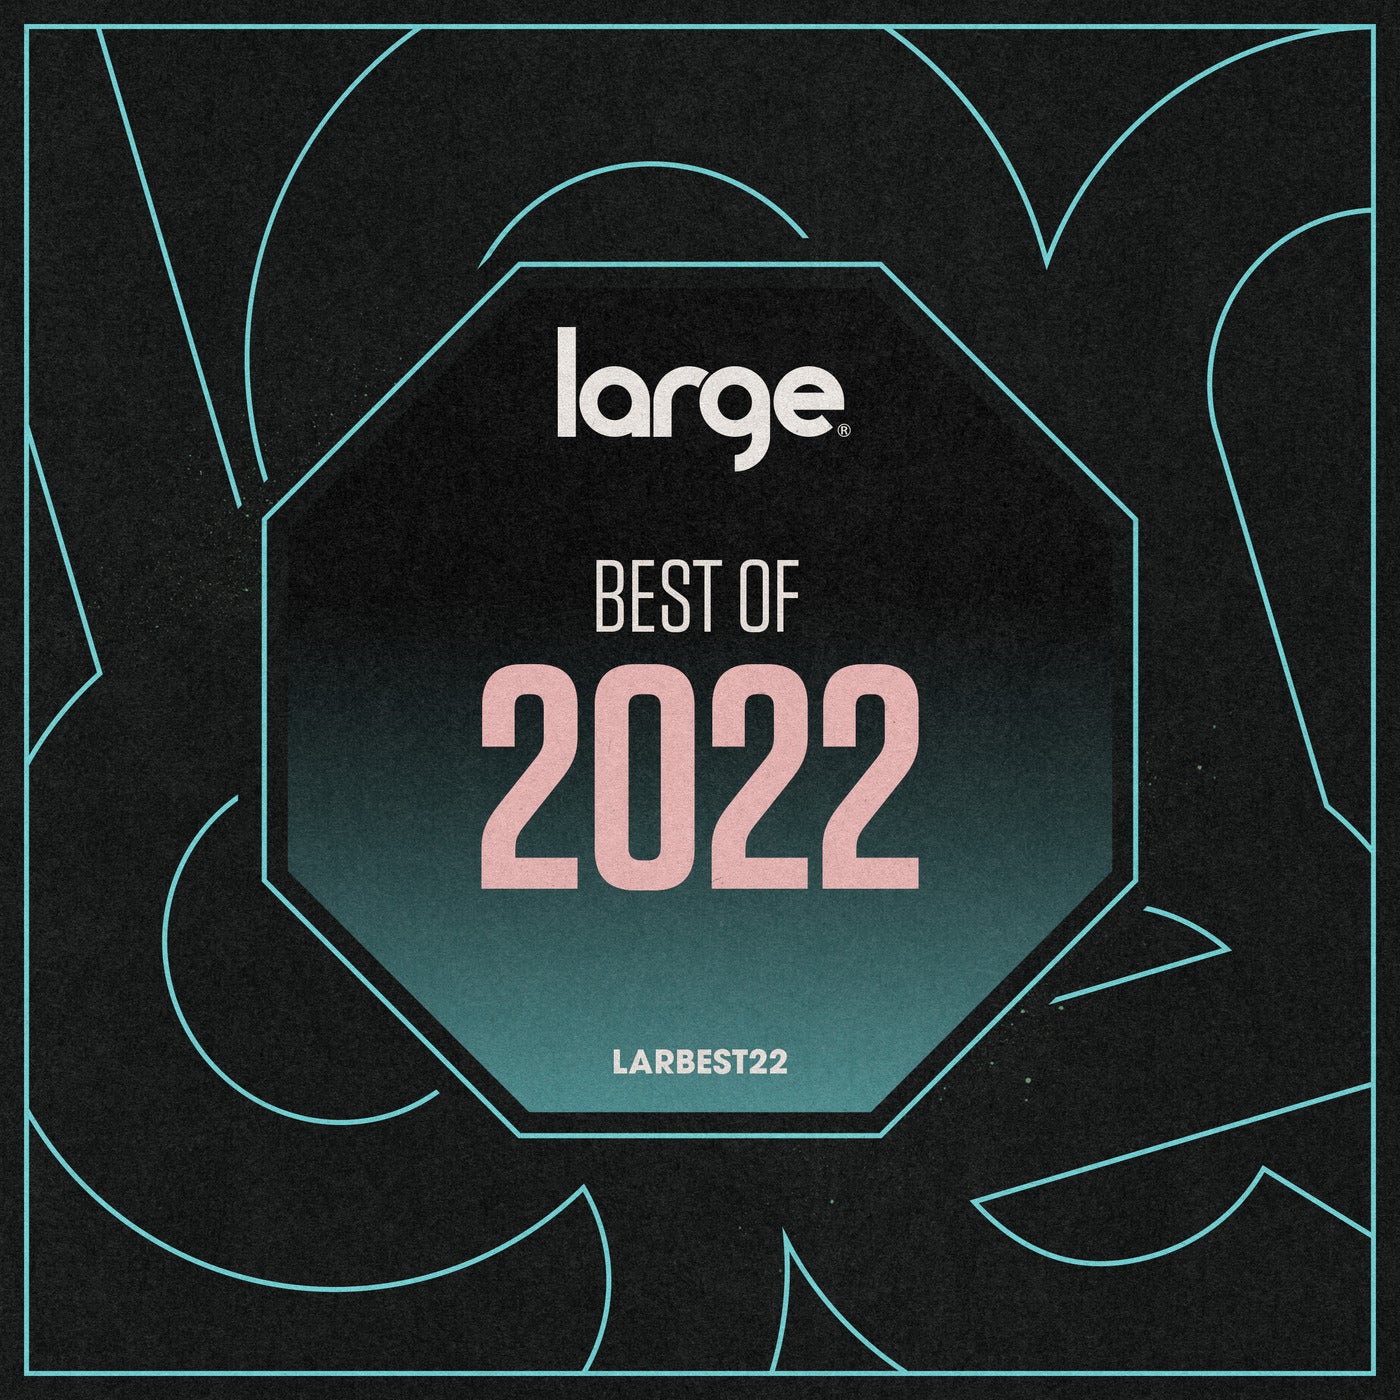 Large Music Best of 2022